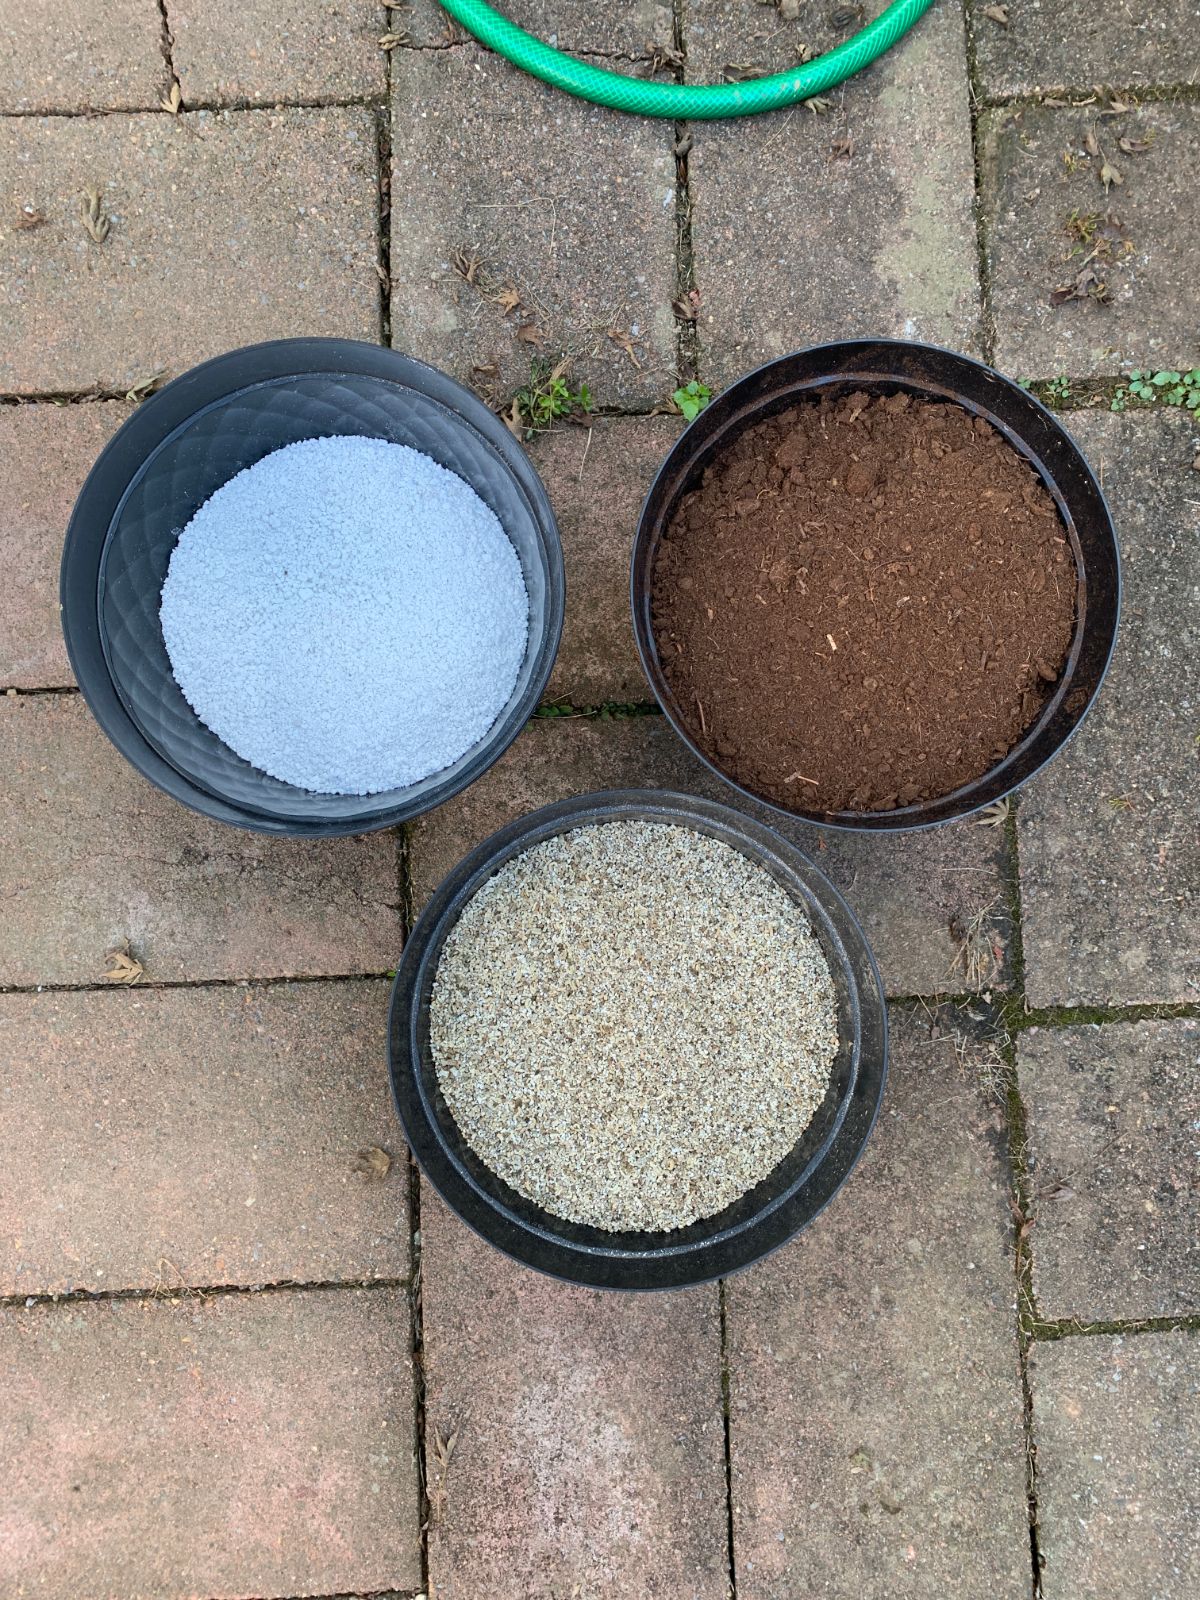 three large buckets filled with garden soil amendments